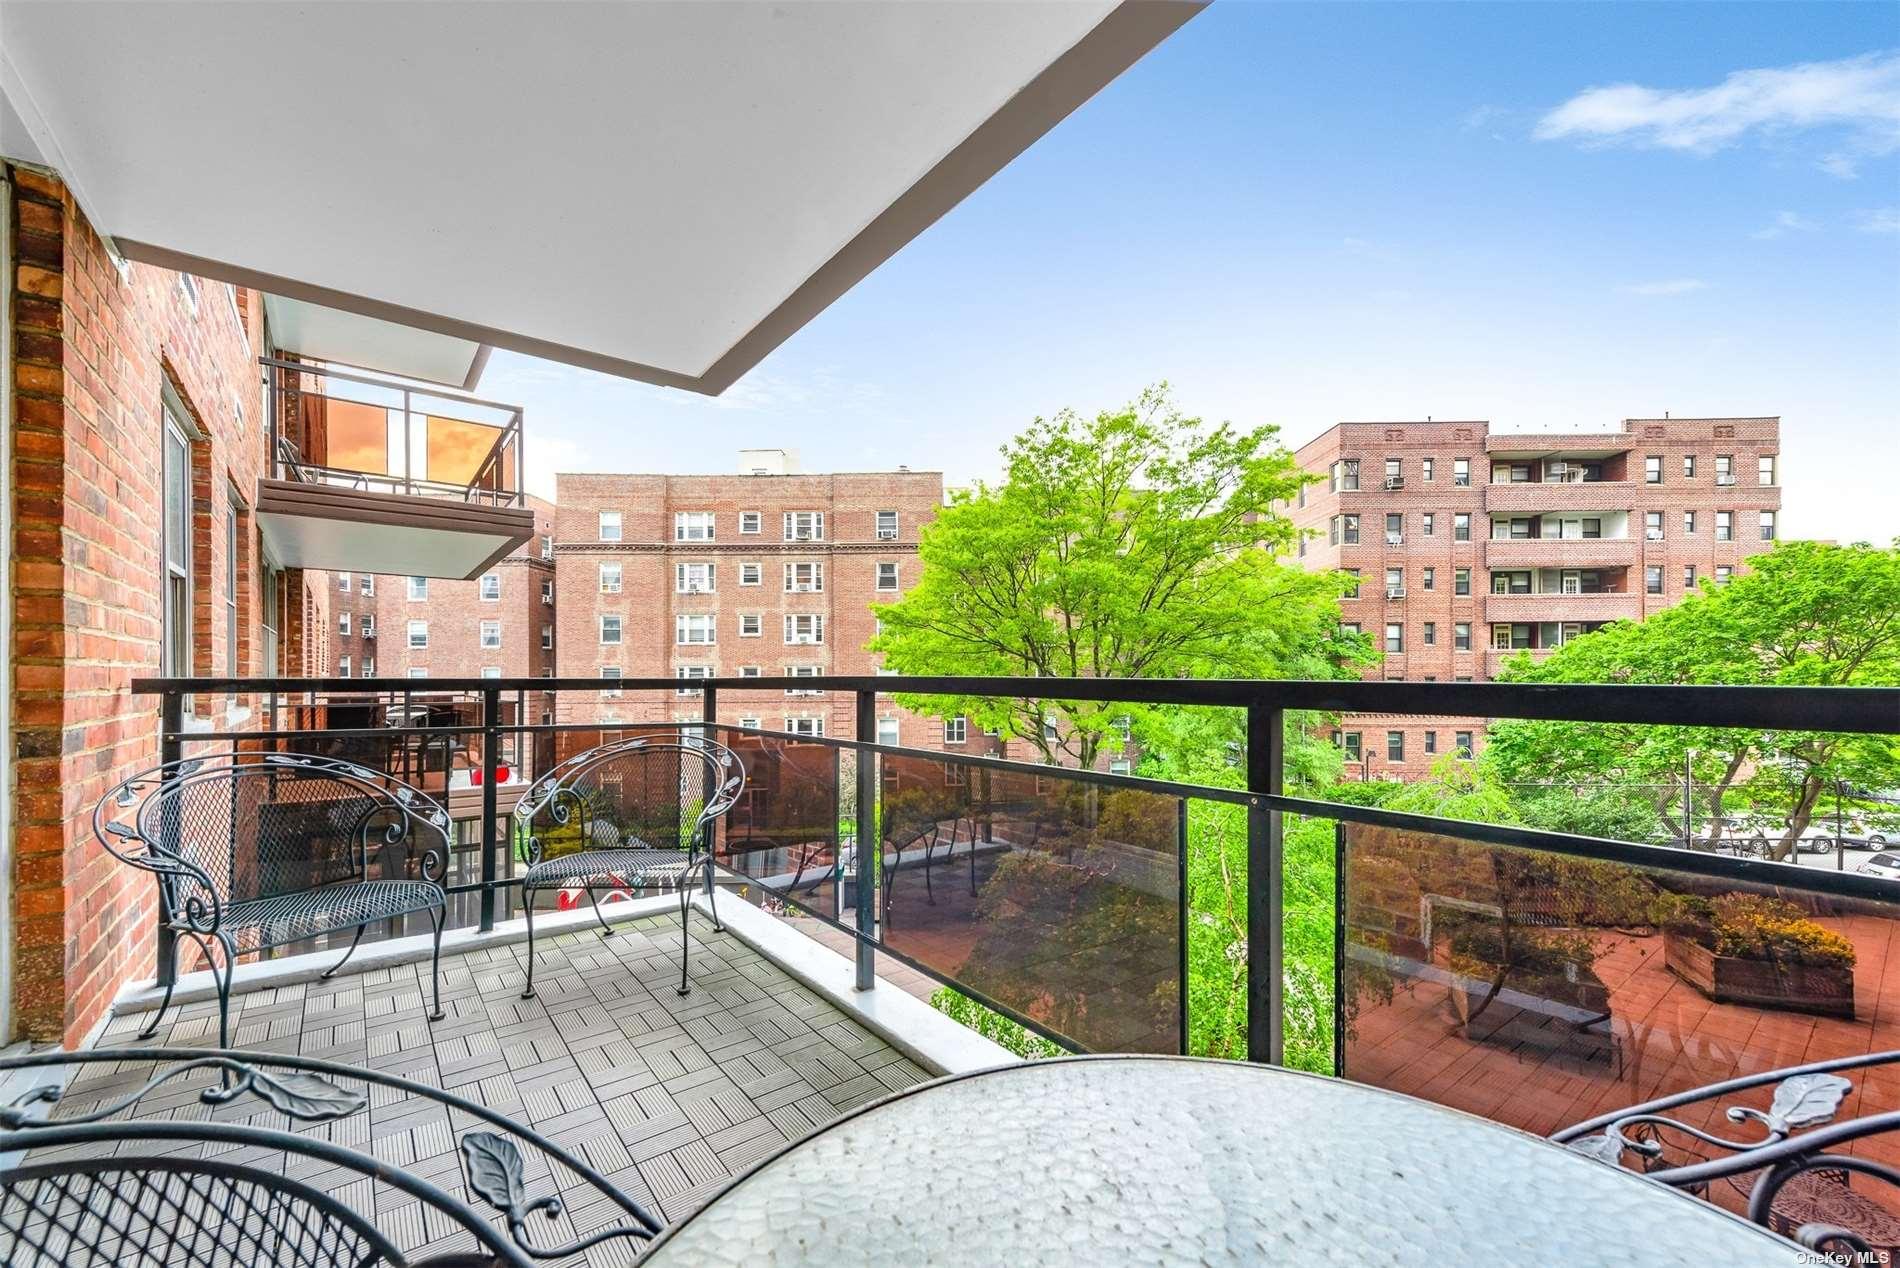 70-20 108th Street #3T in Queens, Forest Hills, NY 11375